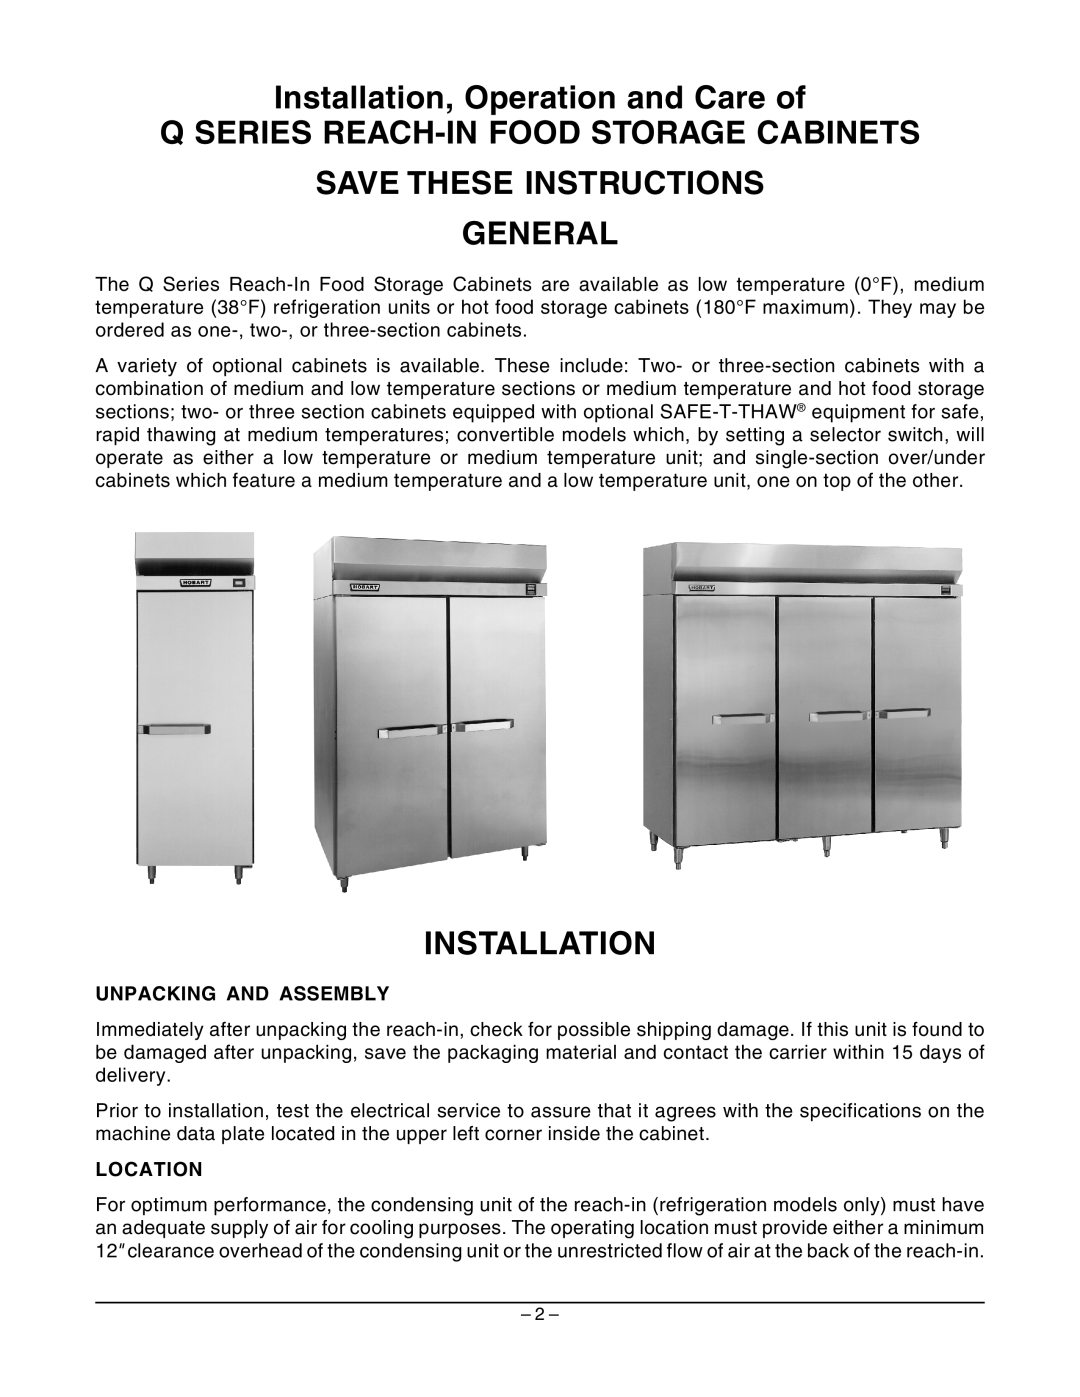 Hobart Installation, Operation and Care of, Q Series Reach-In Food Storage Cabinets Save These Instructions, General 